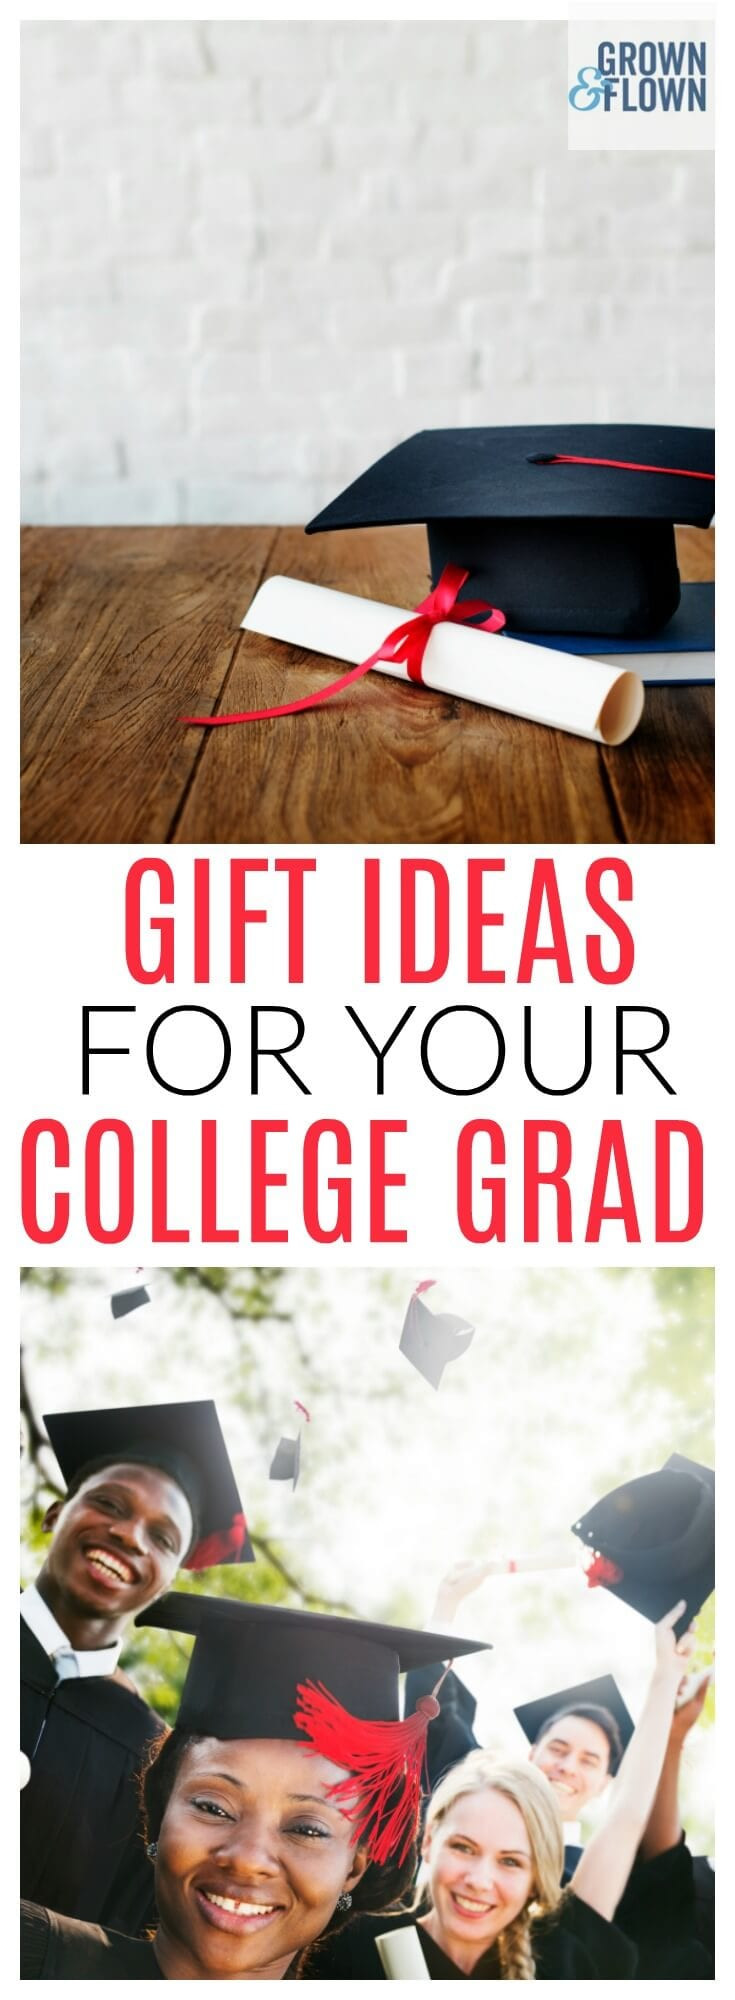 Graduation Gift Ideas College Students
 2019 College Graduation Gifts Your f to Work Kids Will Love